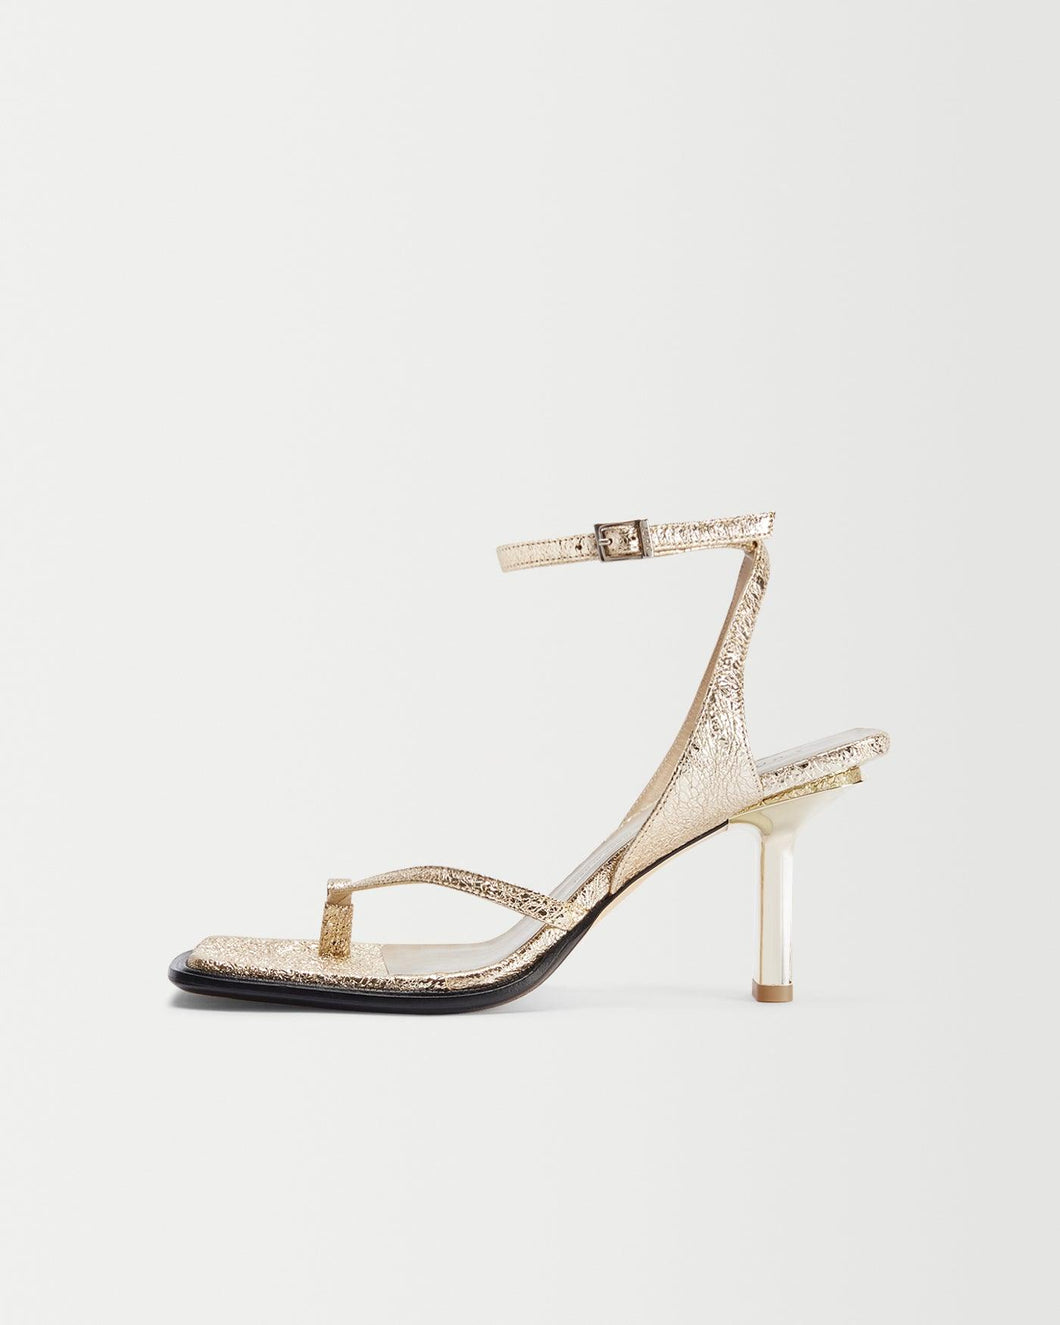 Side view of Yuni Buffa Castrise high Heel women strappy sandal in Comet Gold. Artisanal crafted woman shoe made in Italy with Italian Lamb Nappa leather and silver logo buckle.